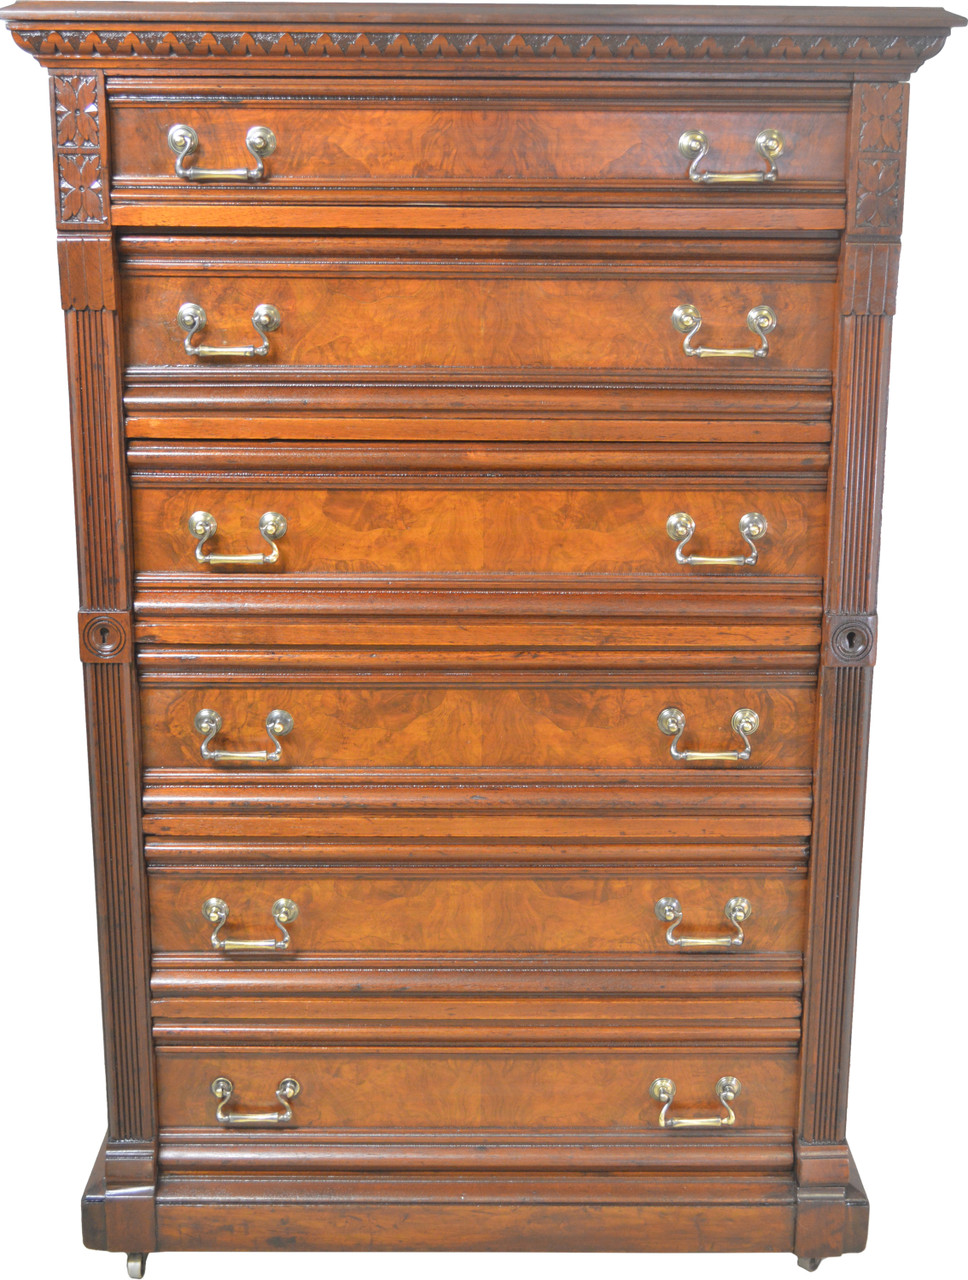 Sold Victorian Lock Side Chest 6 Drawers Maine Antique Furniture